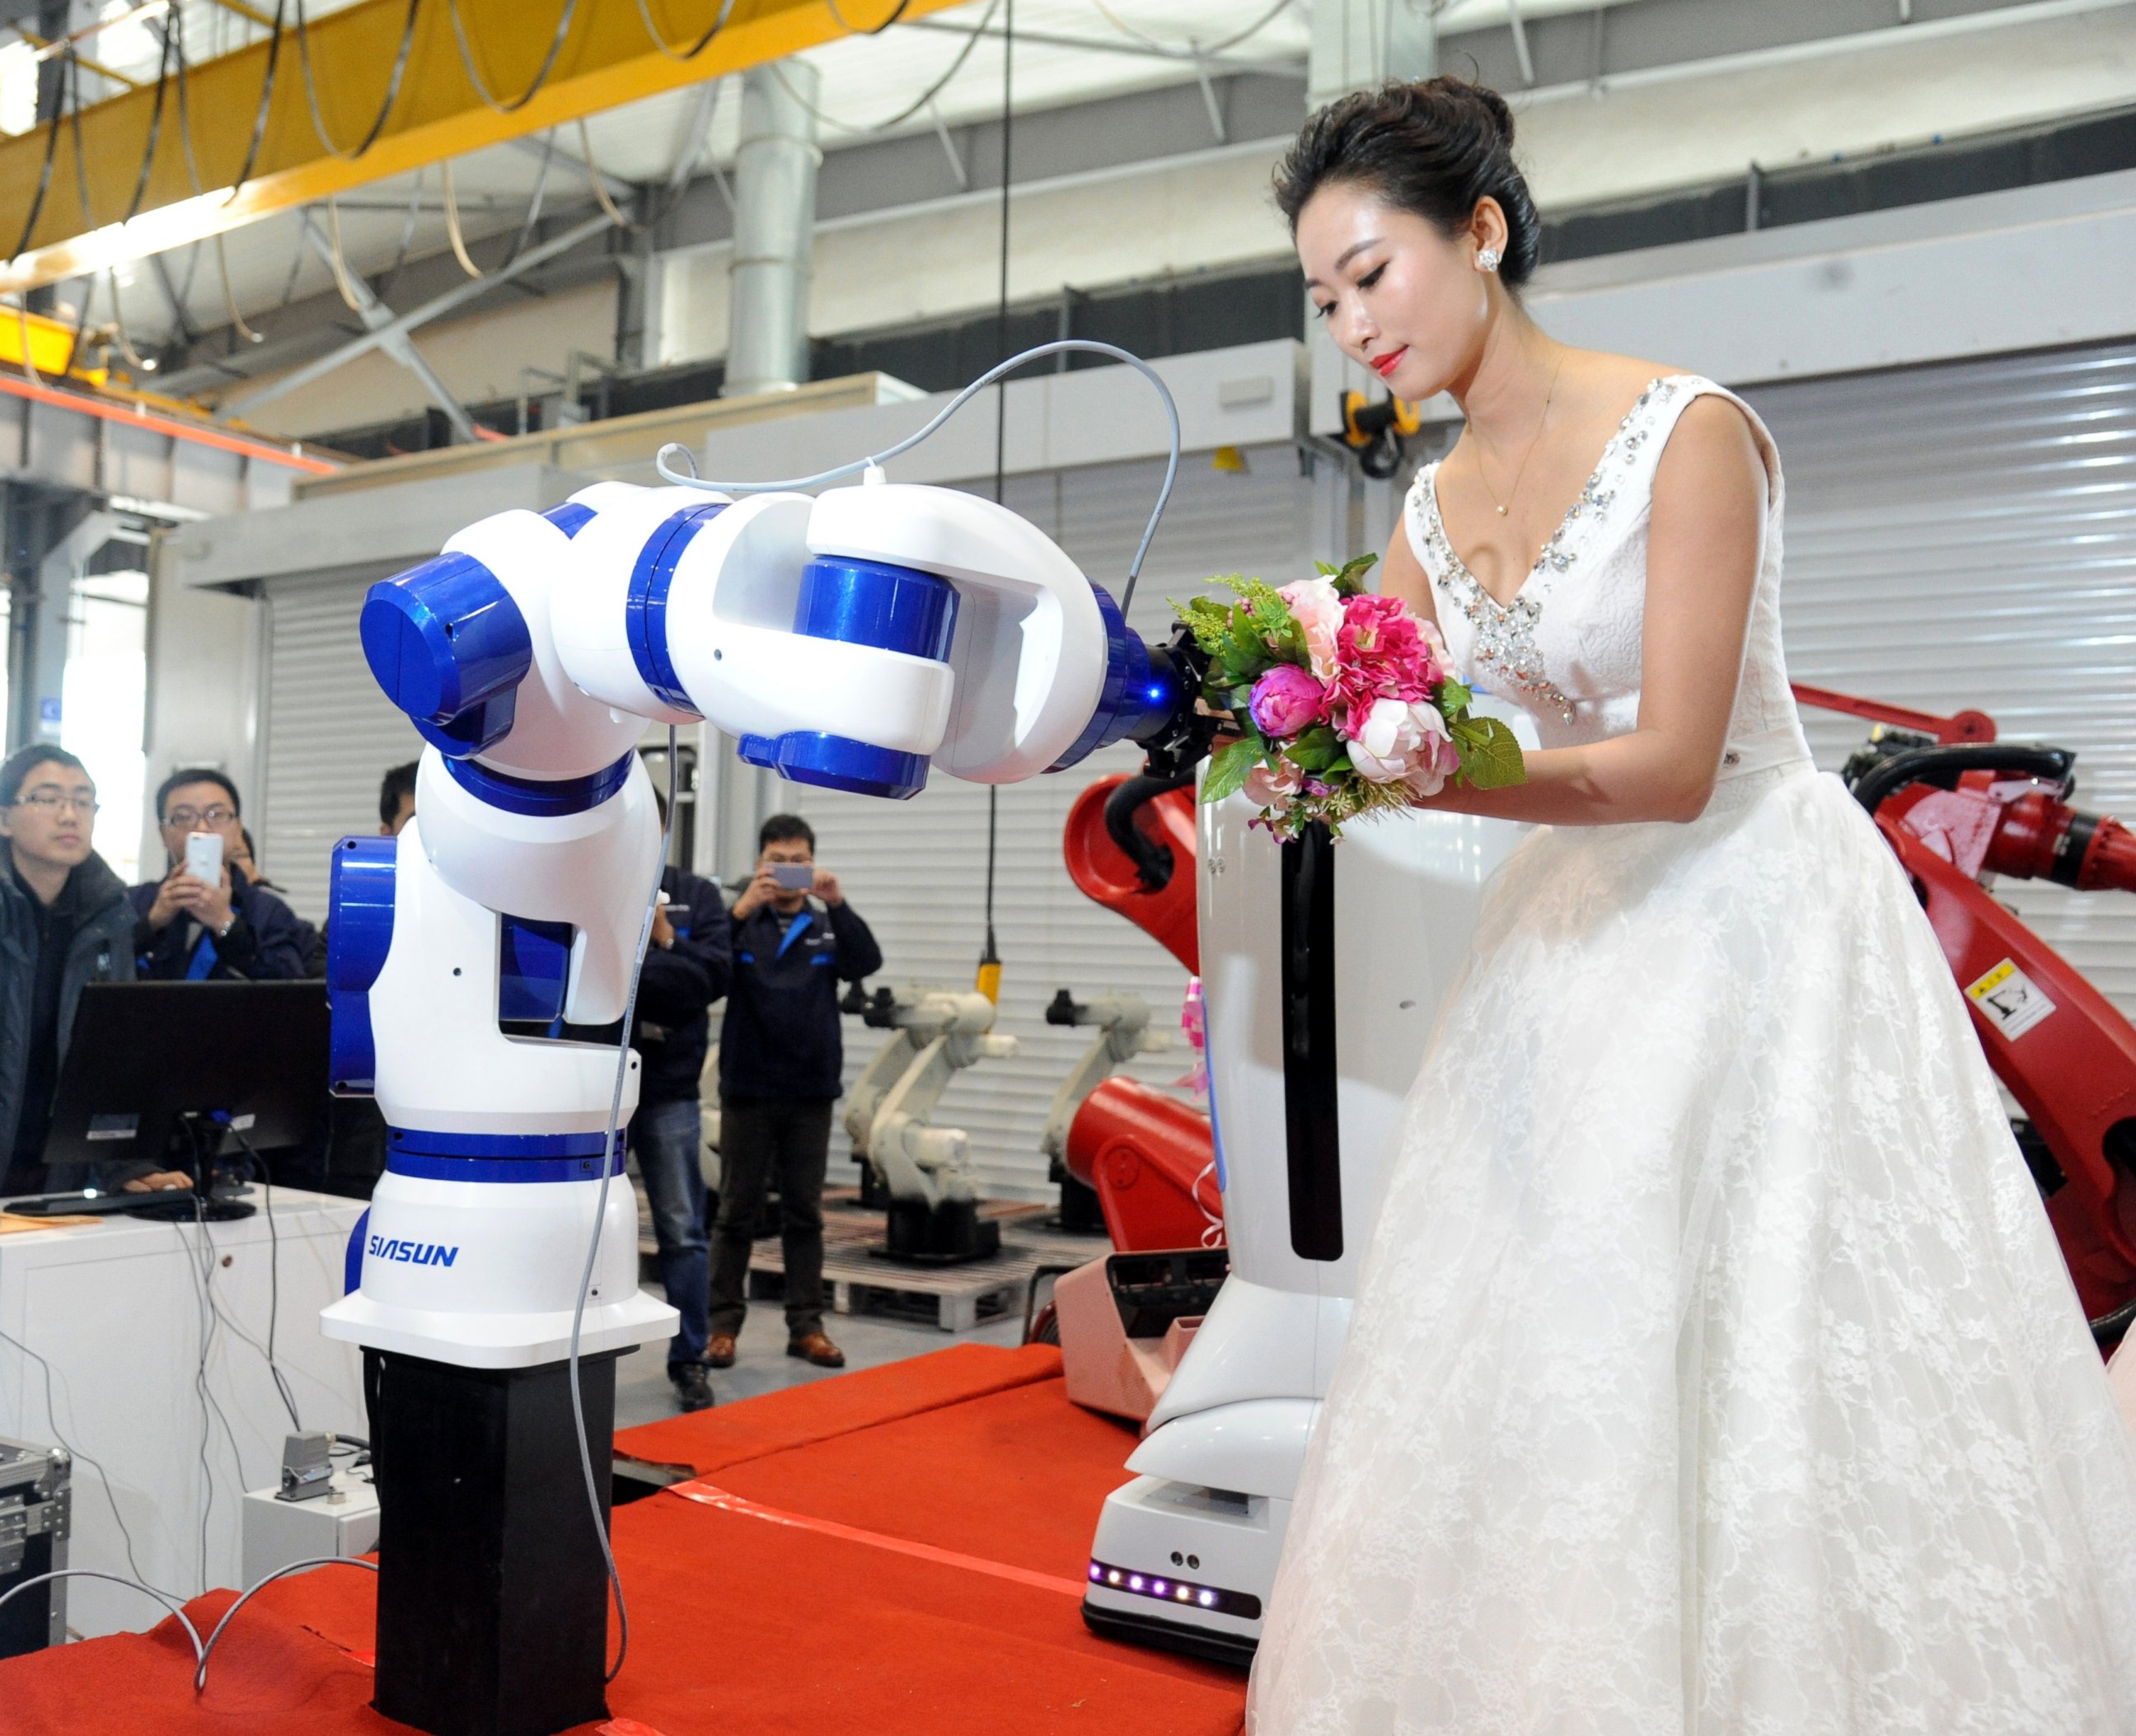 PHOTO: A bride gives the bouquet to a robot during a group wedding ceremony at a robot factory, Jan. 20, 2016, in Shenyang, China.